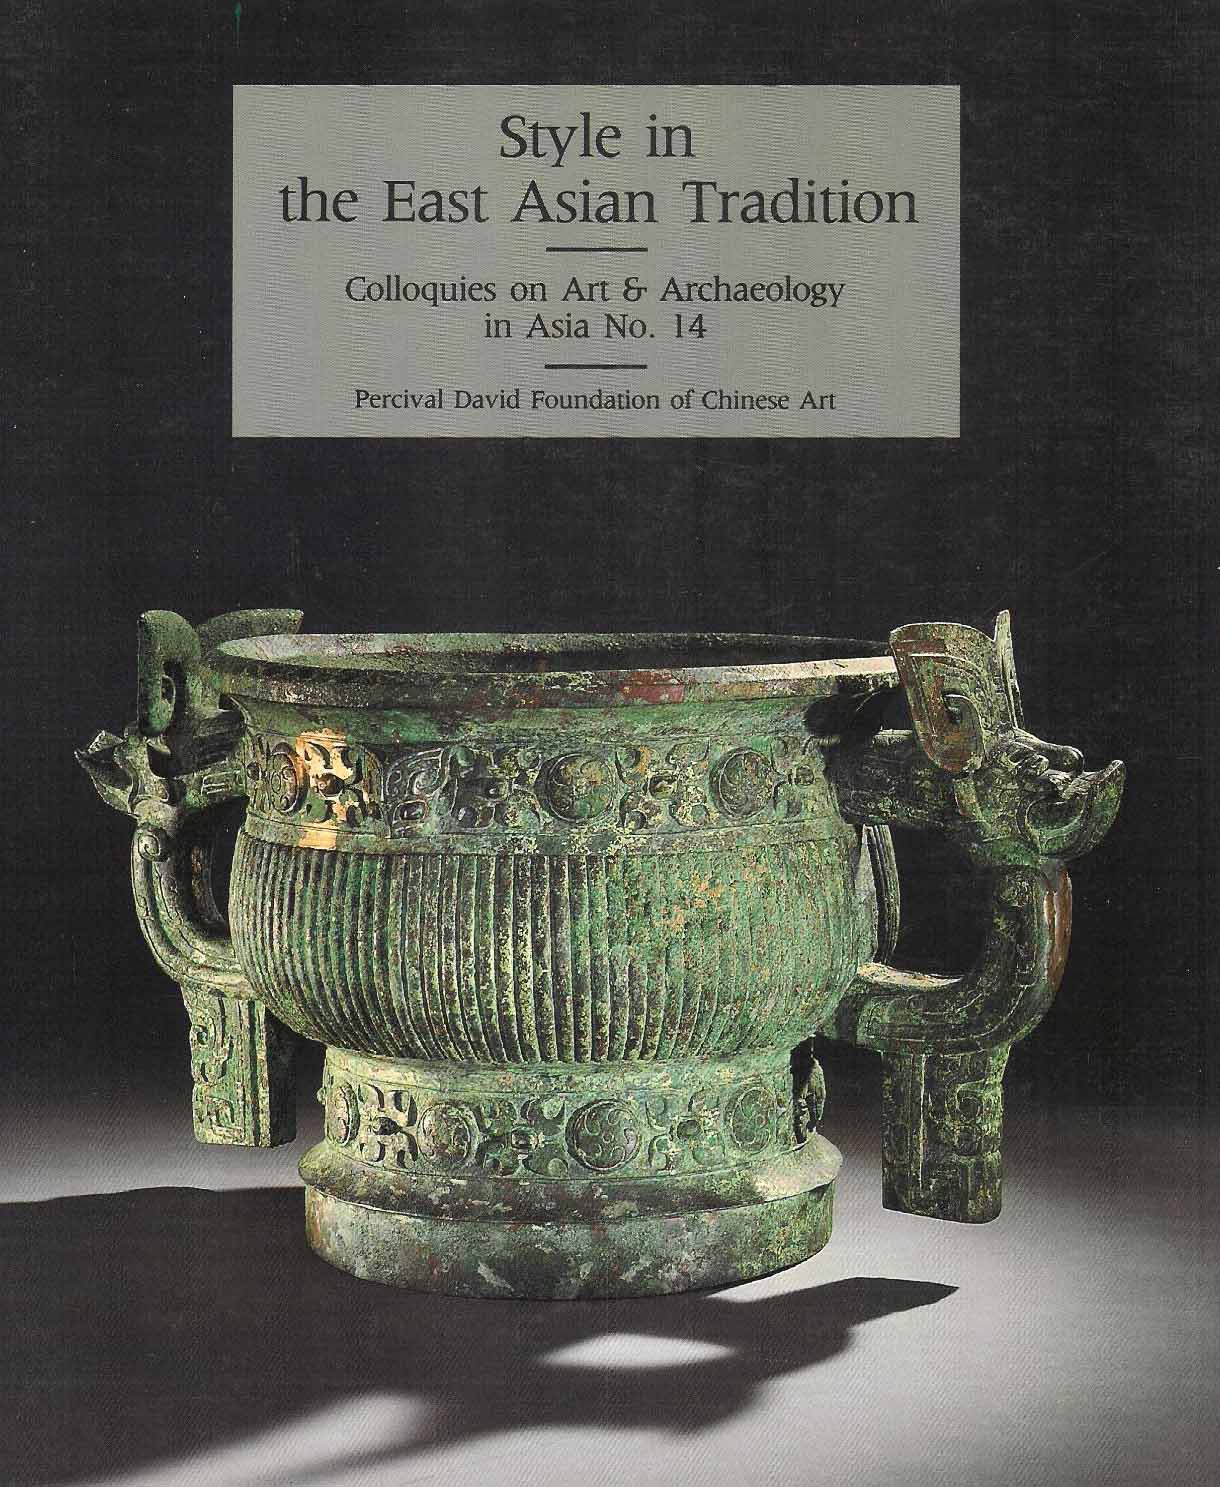 Scott, Rosemary E. & Hutt, Graham - Style in the East Asian Tradition - Colloquies on Art & Archaeology in Asia No. 14